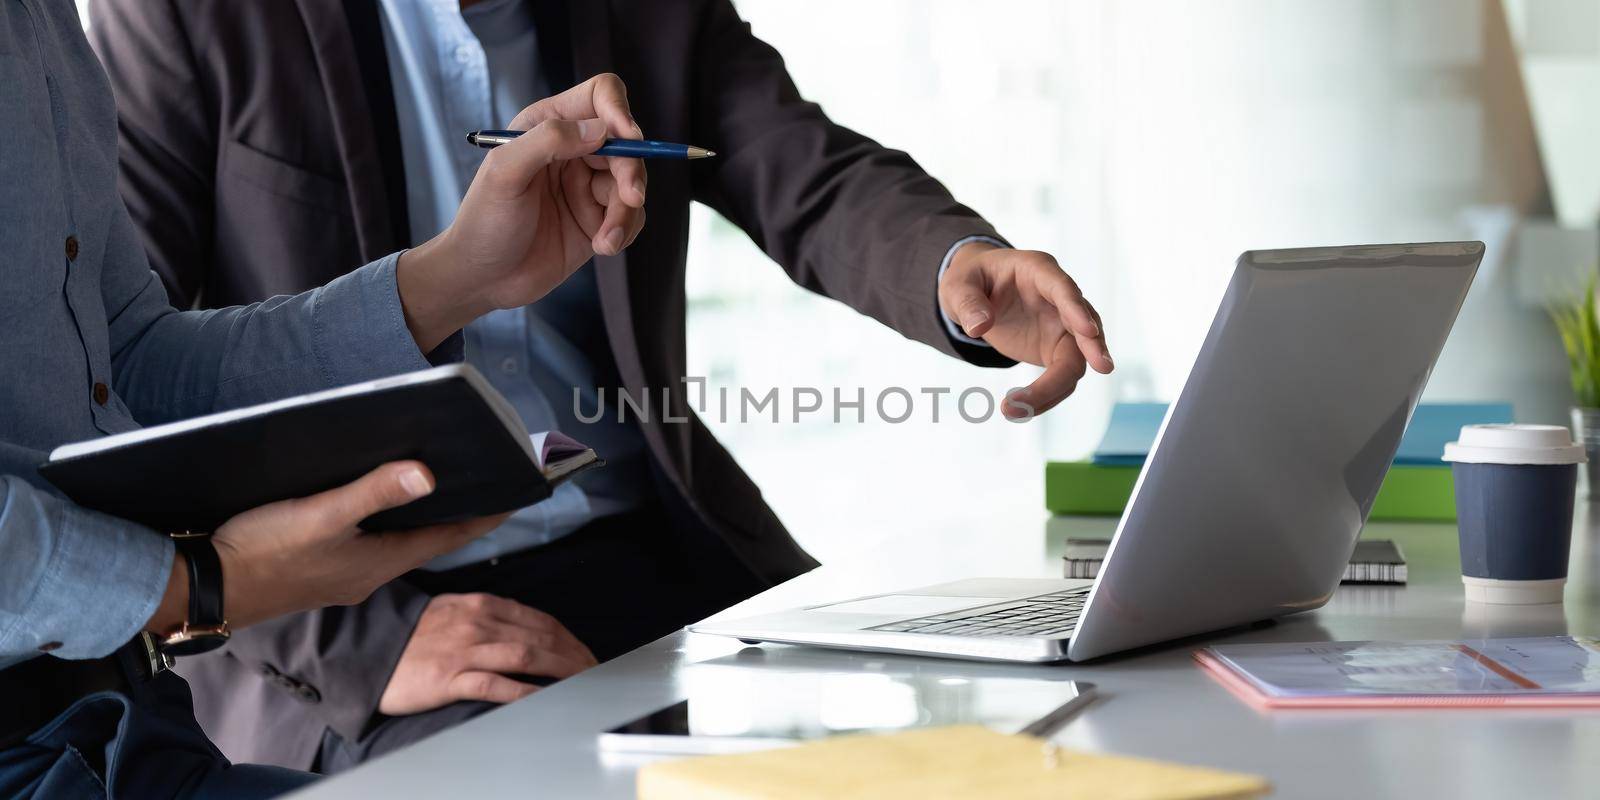 Group of Businesswoman and Accountant checking data document on laptop computer for investigation of corruption account Anti Bribery concept by nateemee